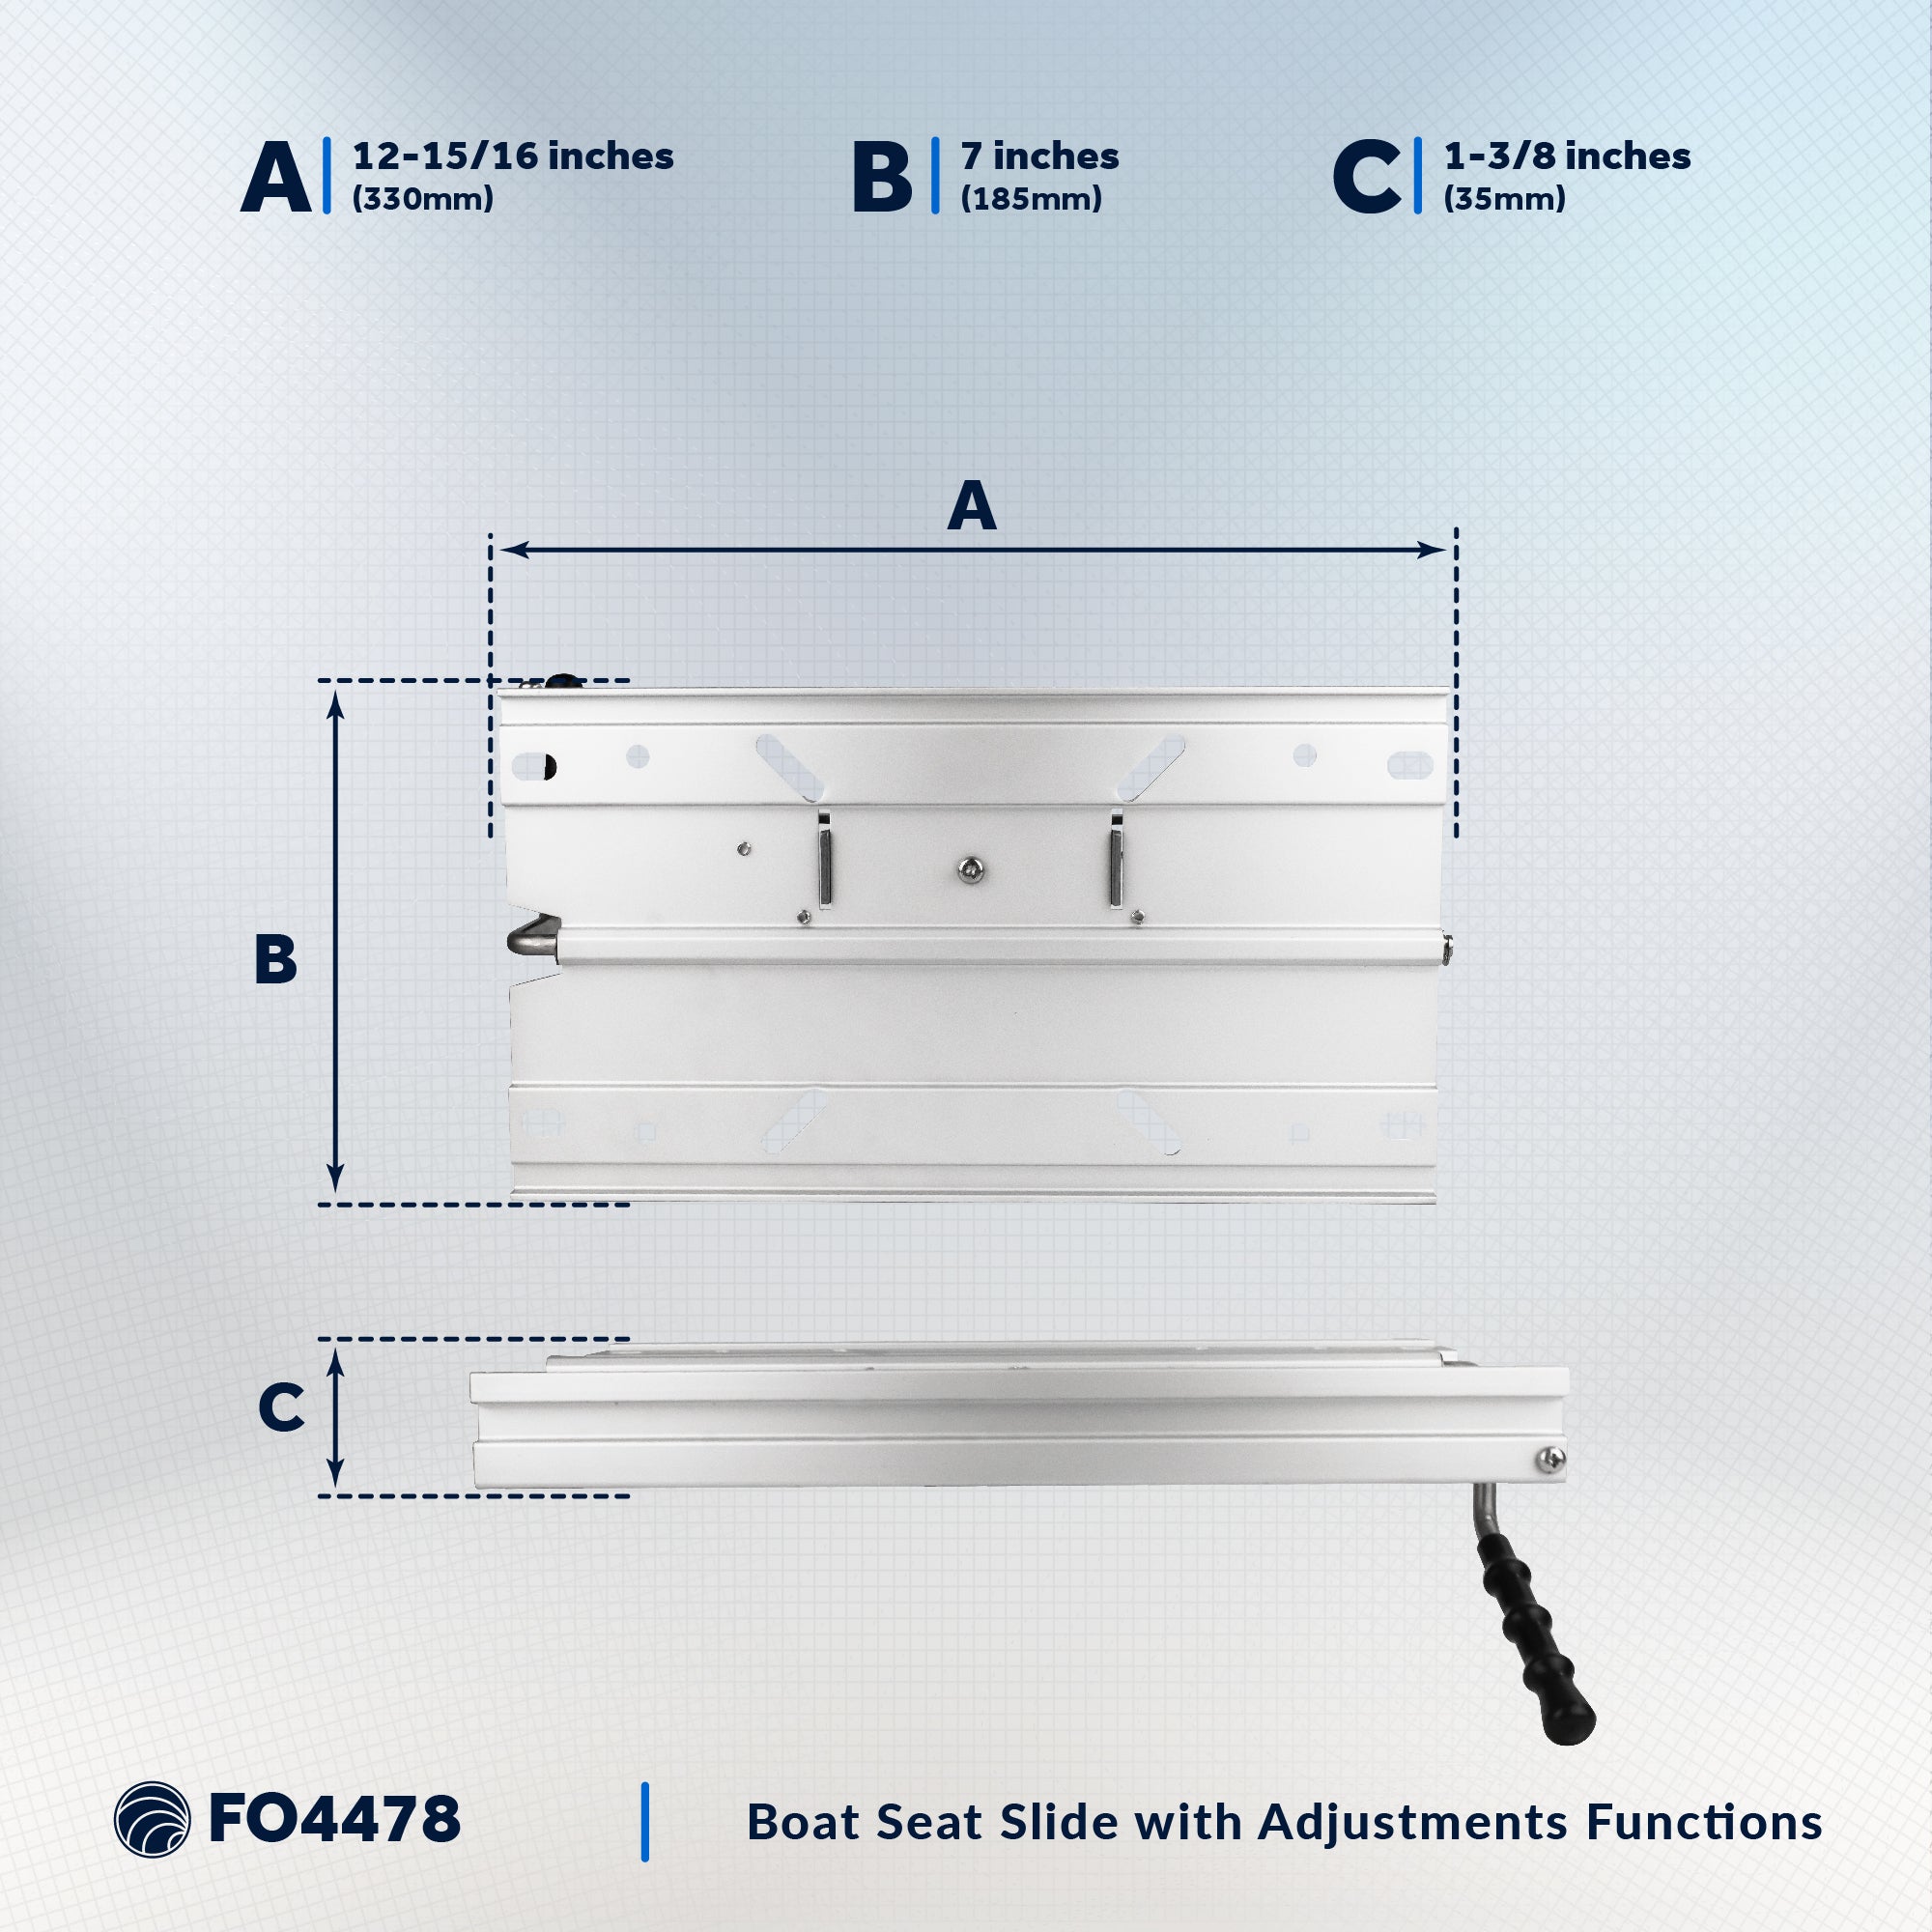 Boat Seat Slide with Locking and Adjustments Functions - FO4478